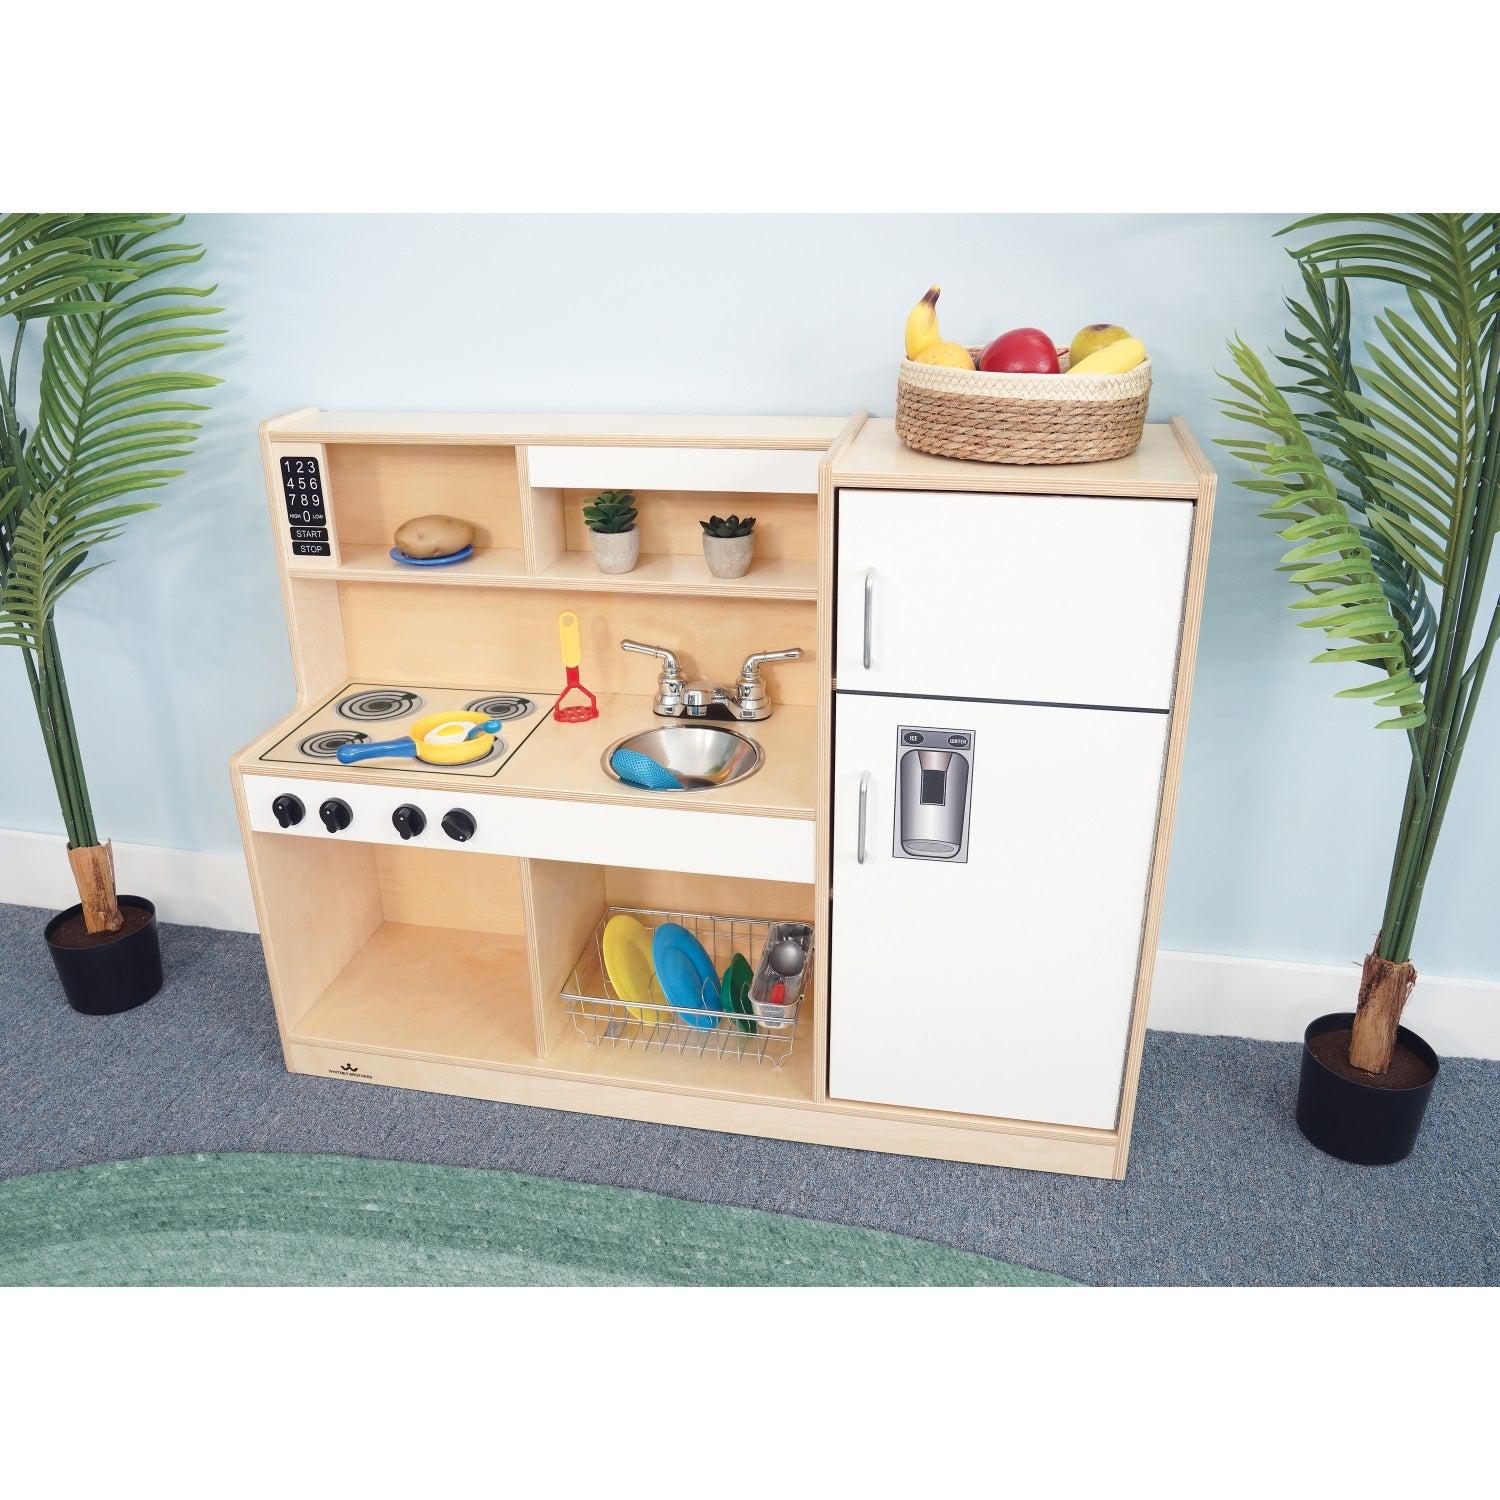 Let's Play Toddler Kitchen Combo, Natural/White